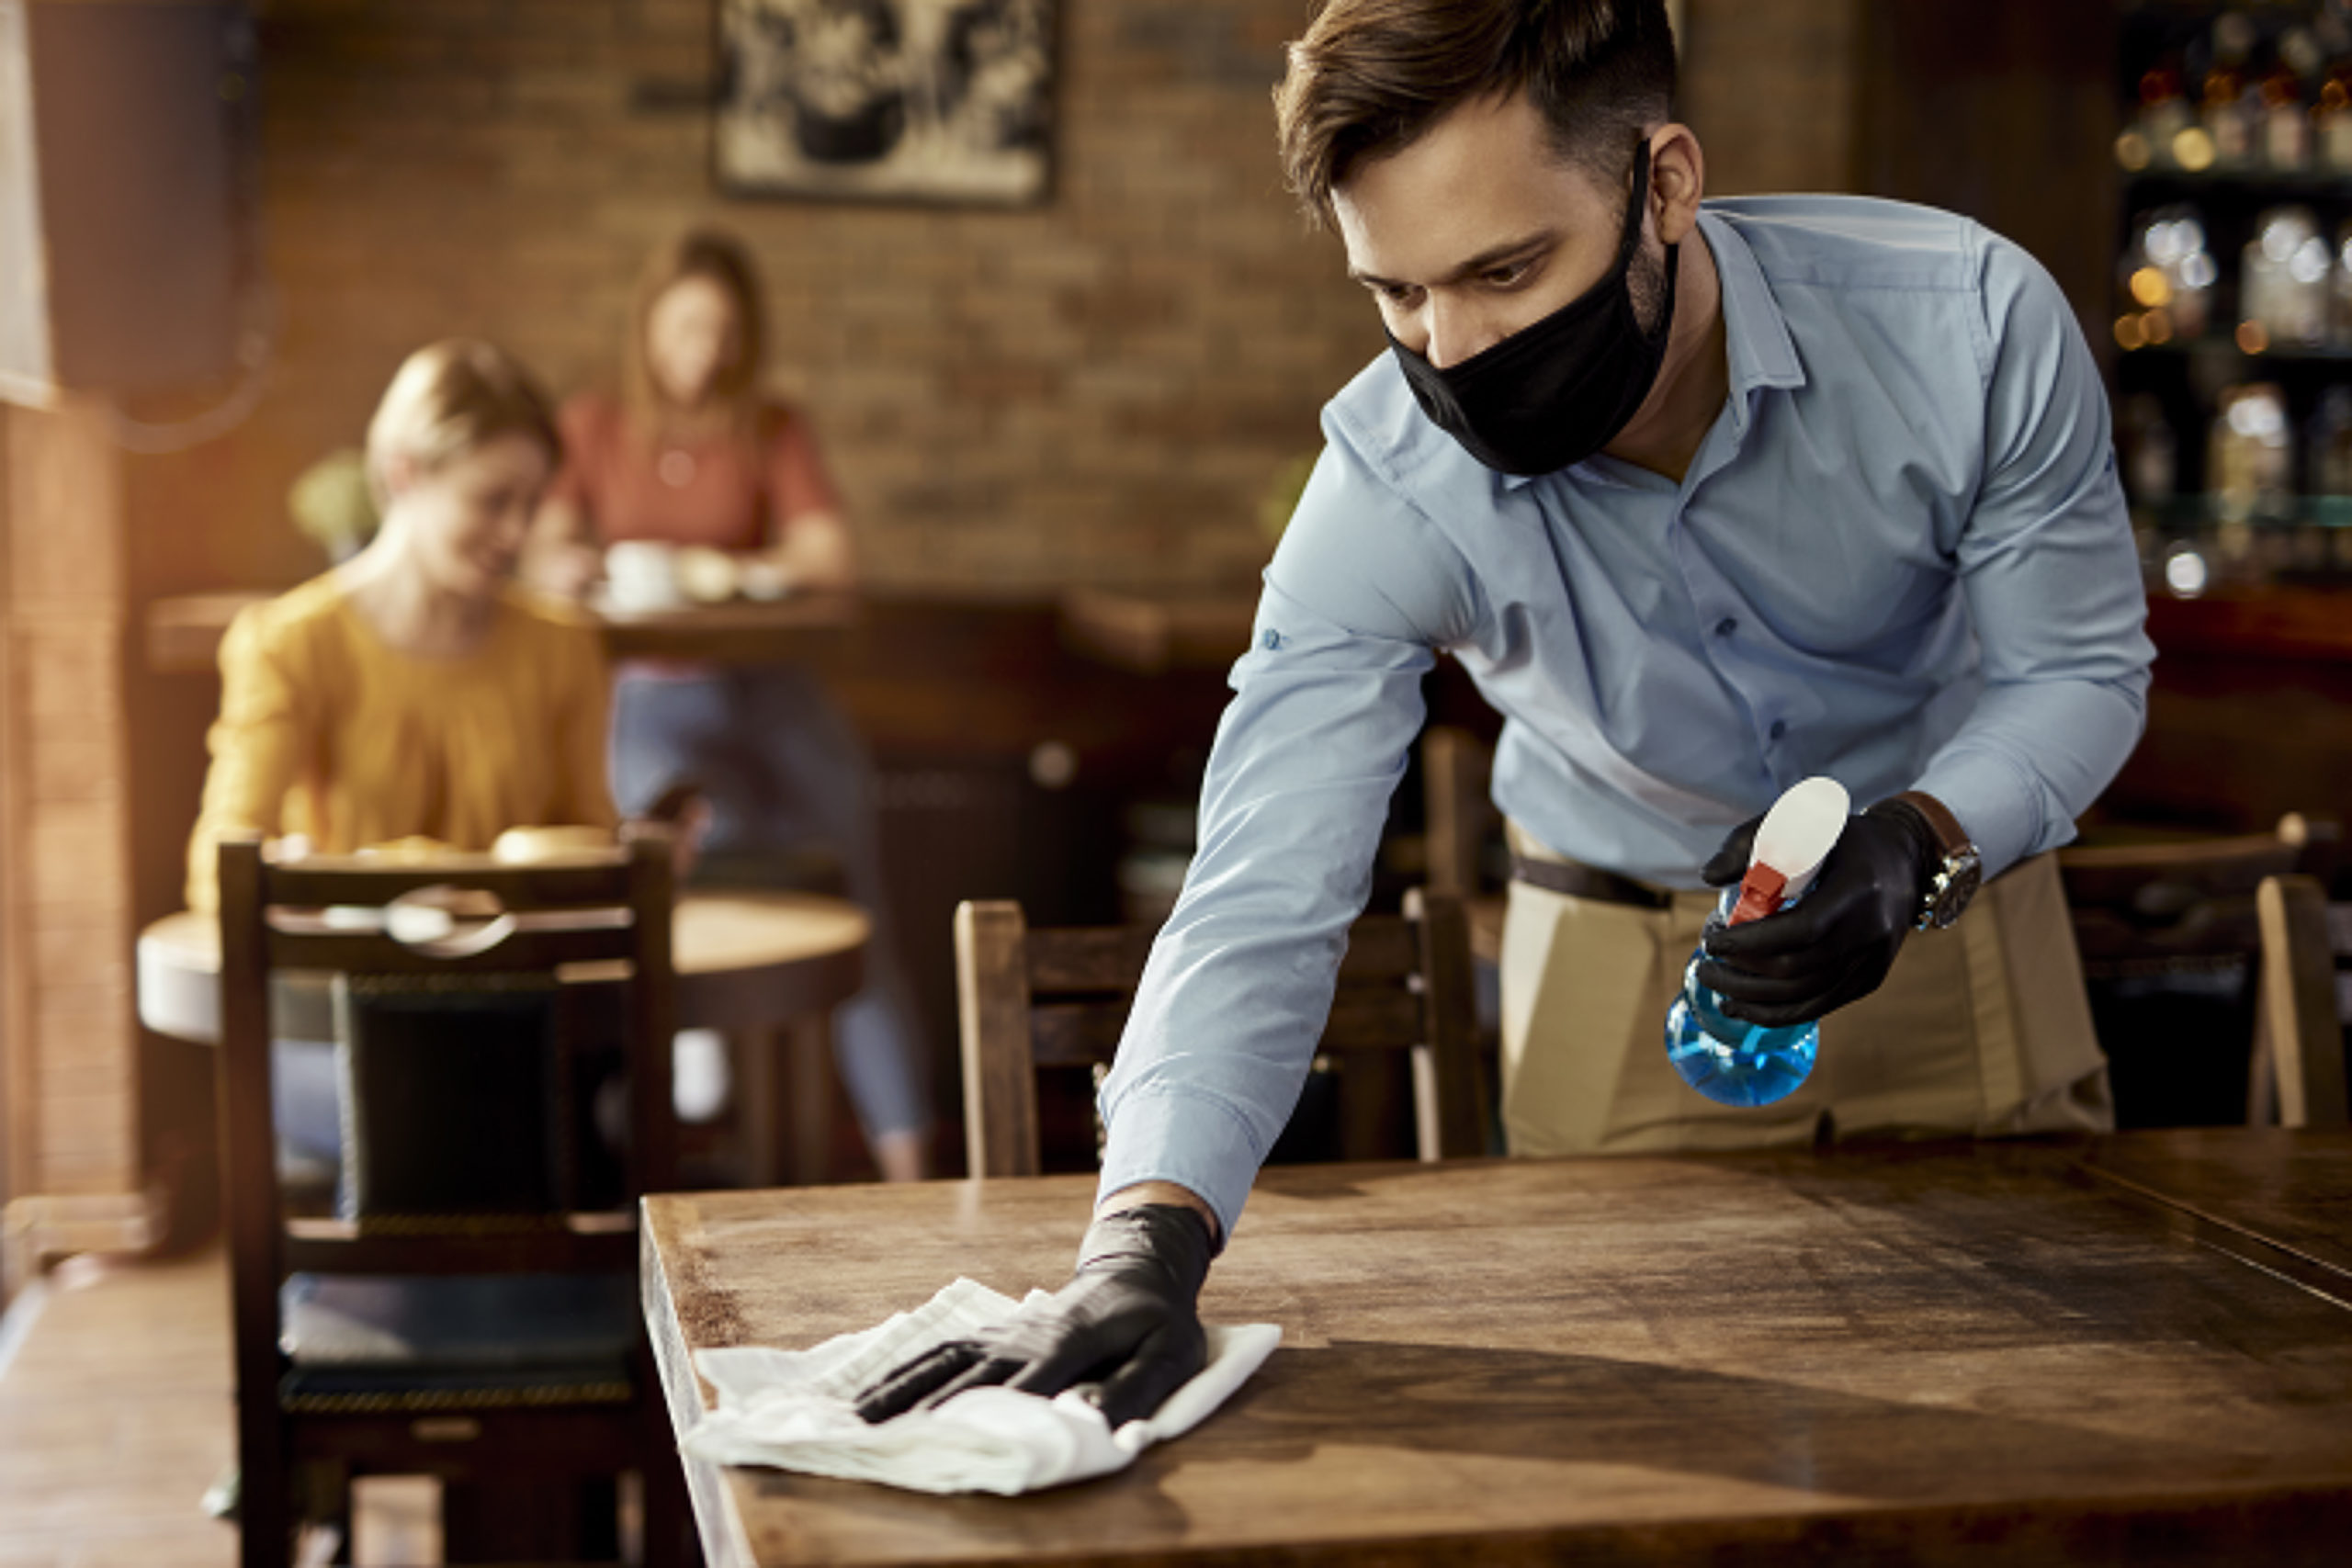 Waiter with protective face mask disinfecting tables in a pub.